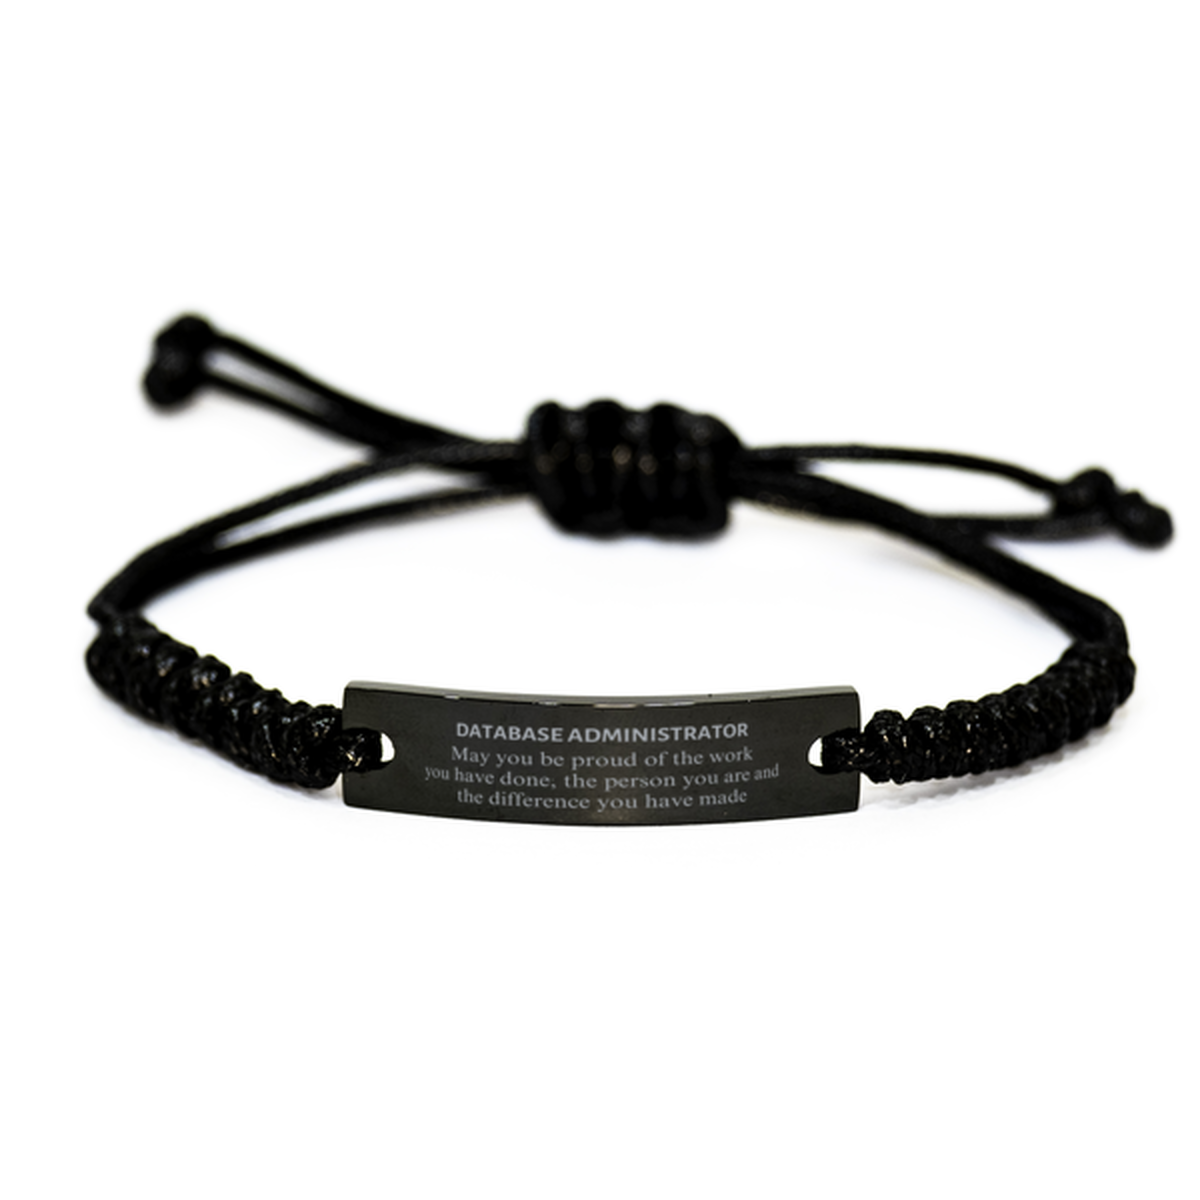 Database Administrator May you be proud of the work you have done, Retirement Database Administrator Black Rope Bracelet for Colleague Appreciation Gifts Amazing for Database Administrator